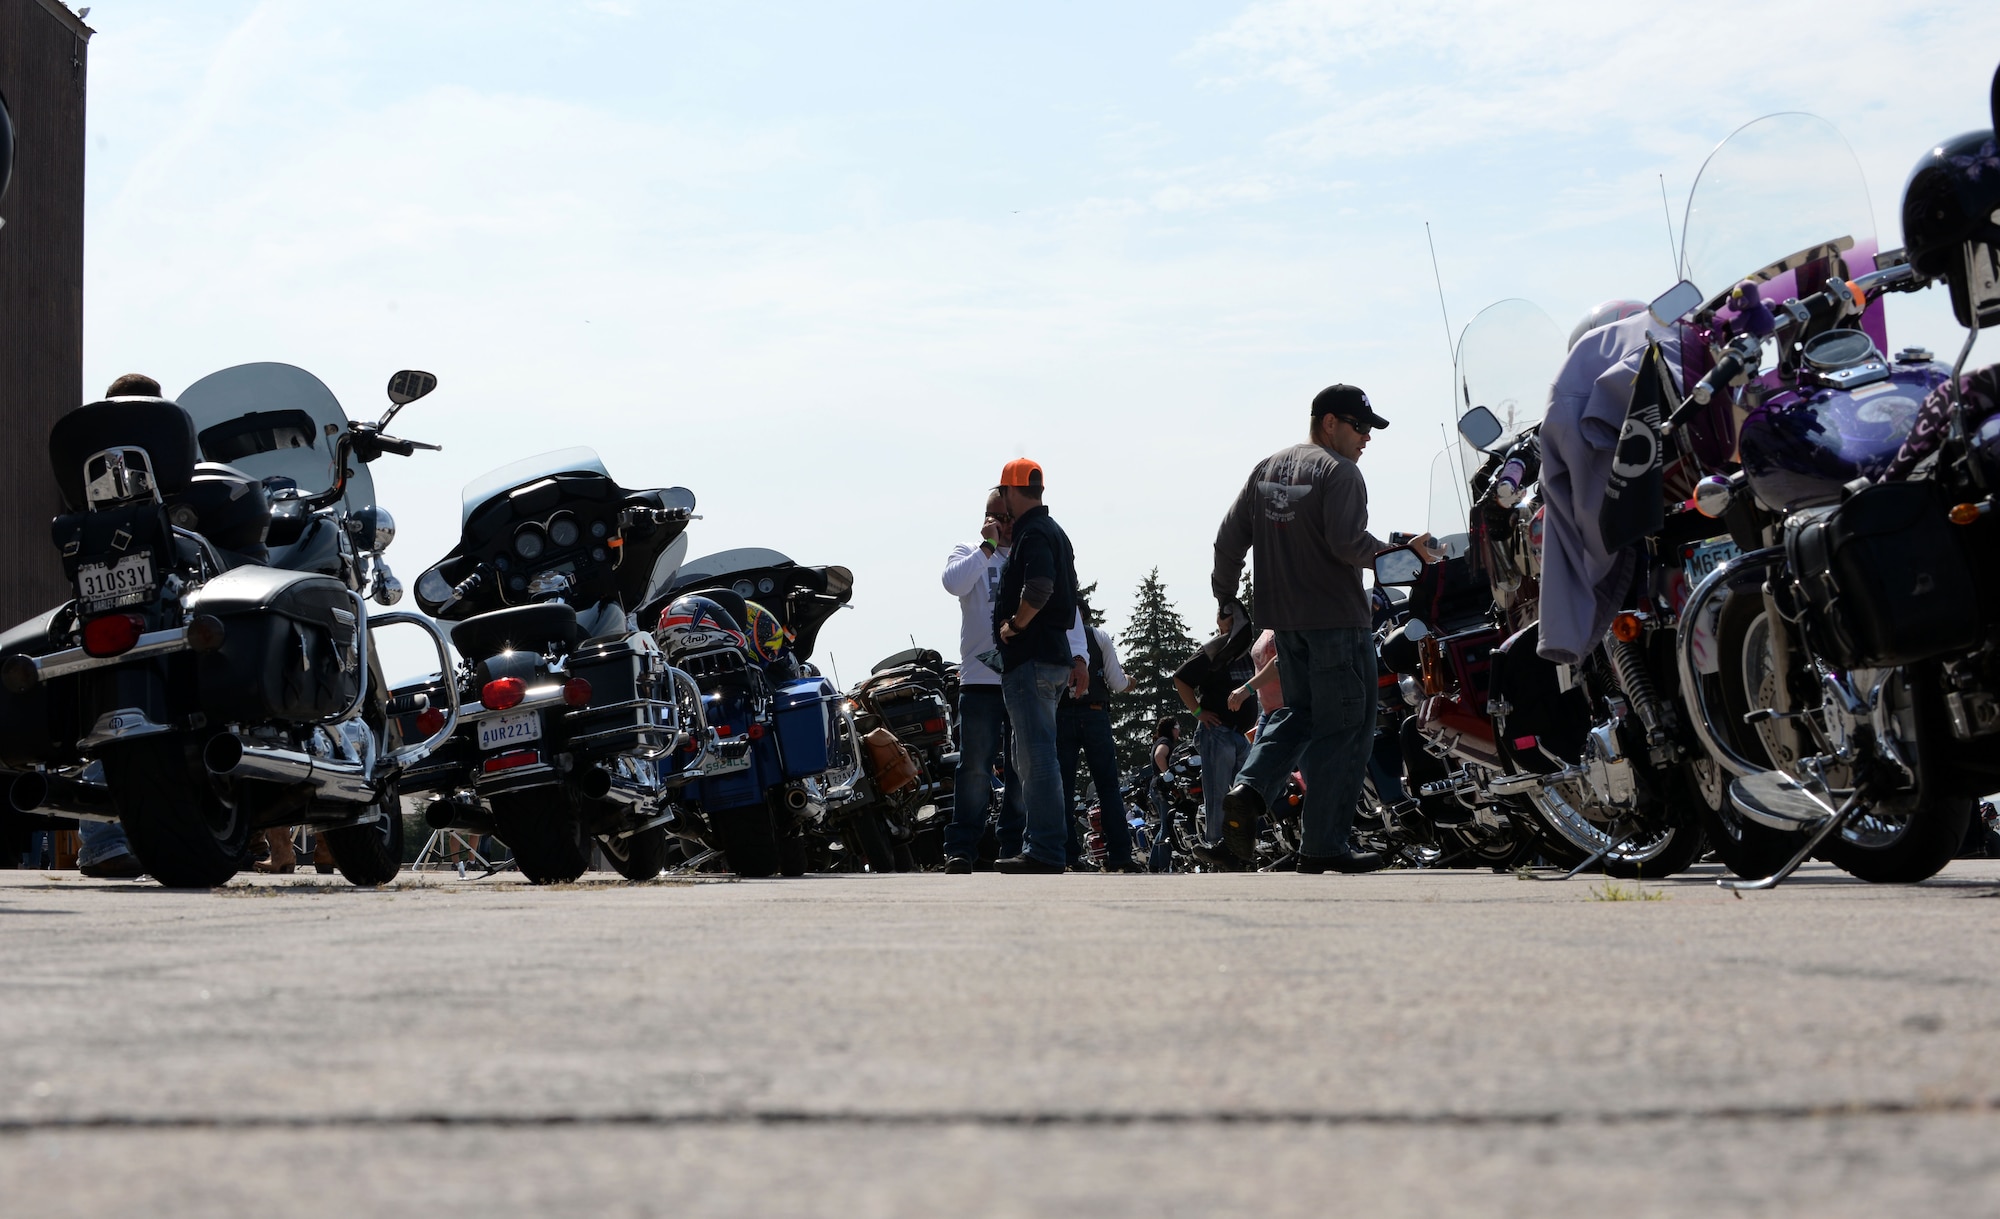 Bikers gather and talk about their motorcycles before riding to the Sturgis Veterans Appreciation Ceremony Aug. 8, 2017 on Ellsworth Air Force Base, S.D. This is the 17th Annual Dakota Thunder run and is hosted by the Green Knights Military Motorcycle Club. (U.S. Air Force photo by Airman 1st Class Thomas Karol)